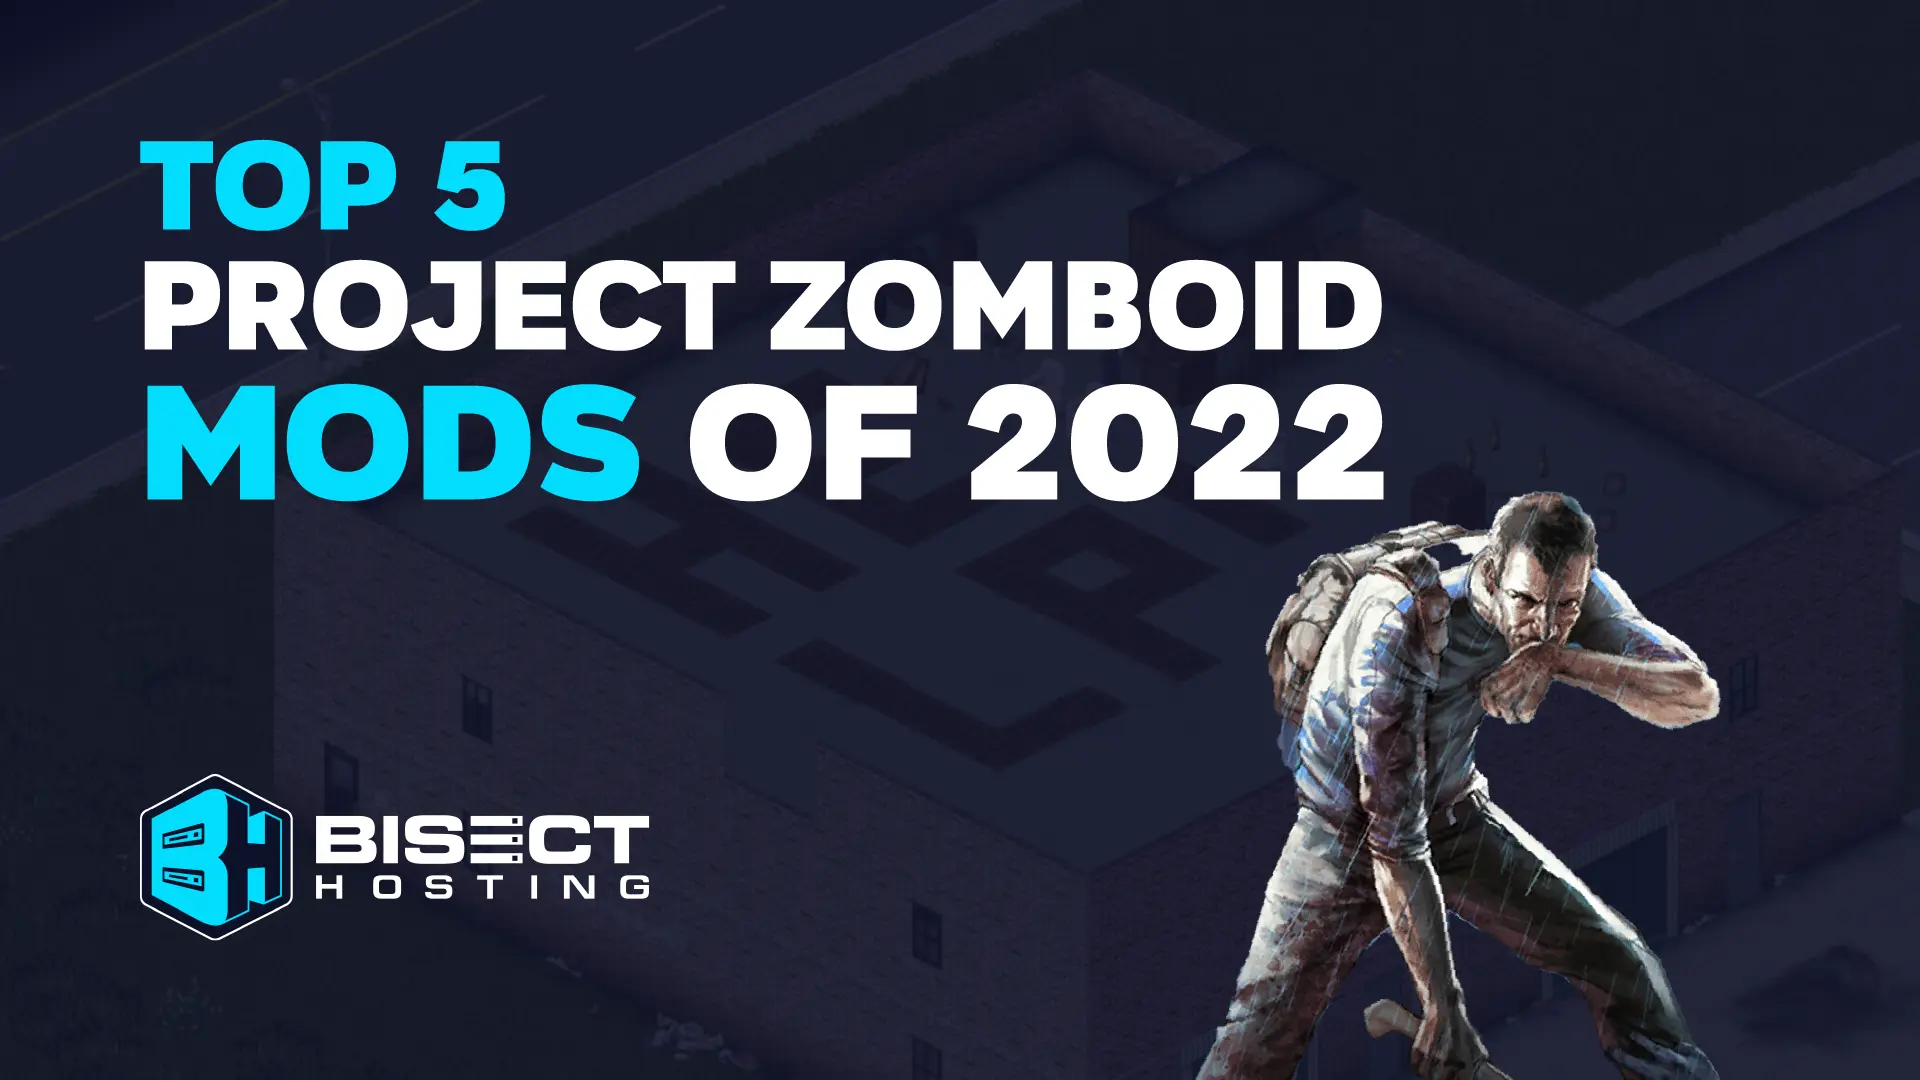 Top 5 Project Zomboid Mods of 2022